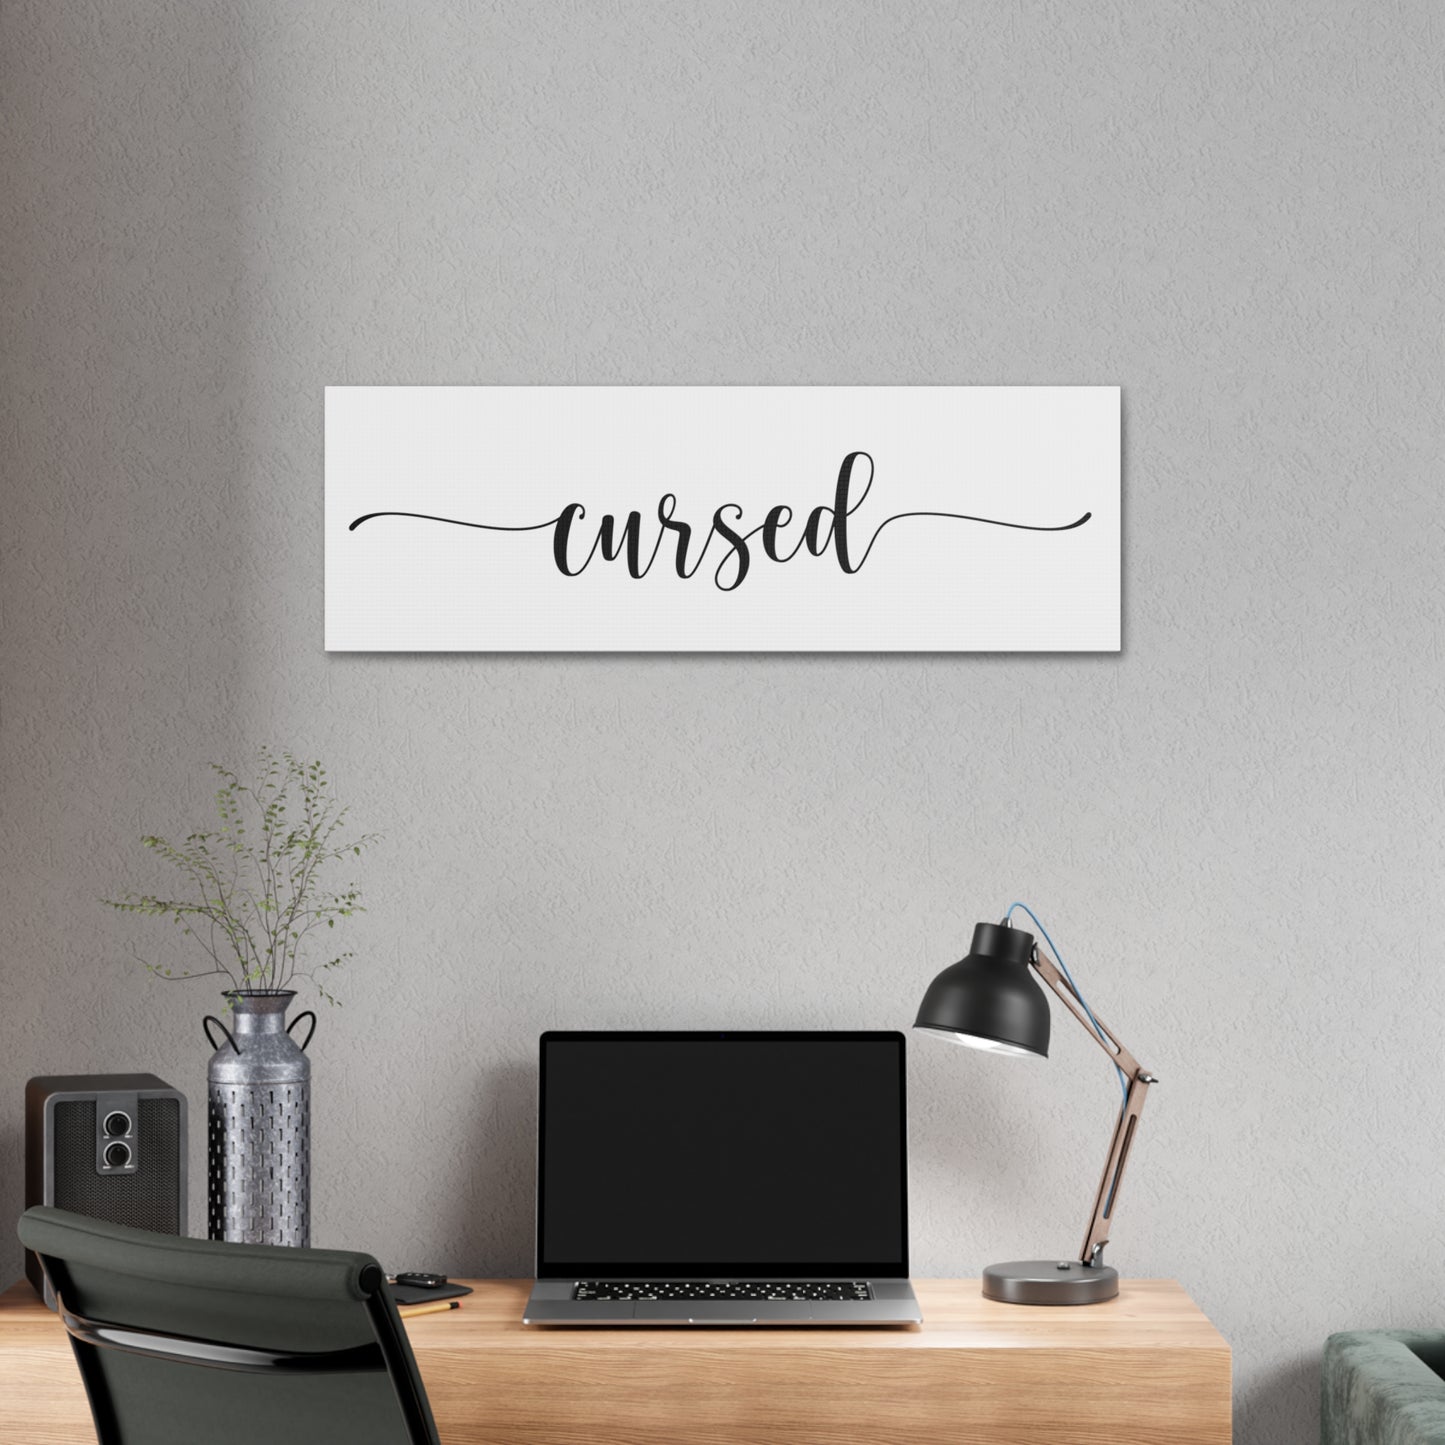 Cursed (anti "Blessed" ) - Classic Stretched Canvas